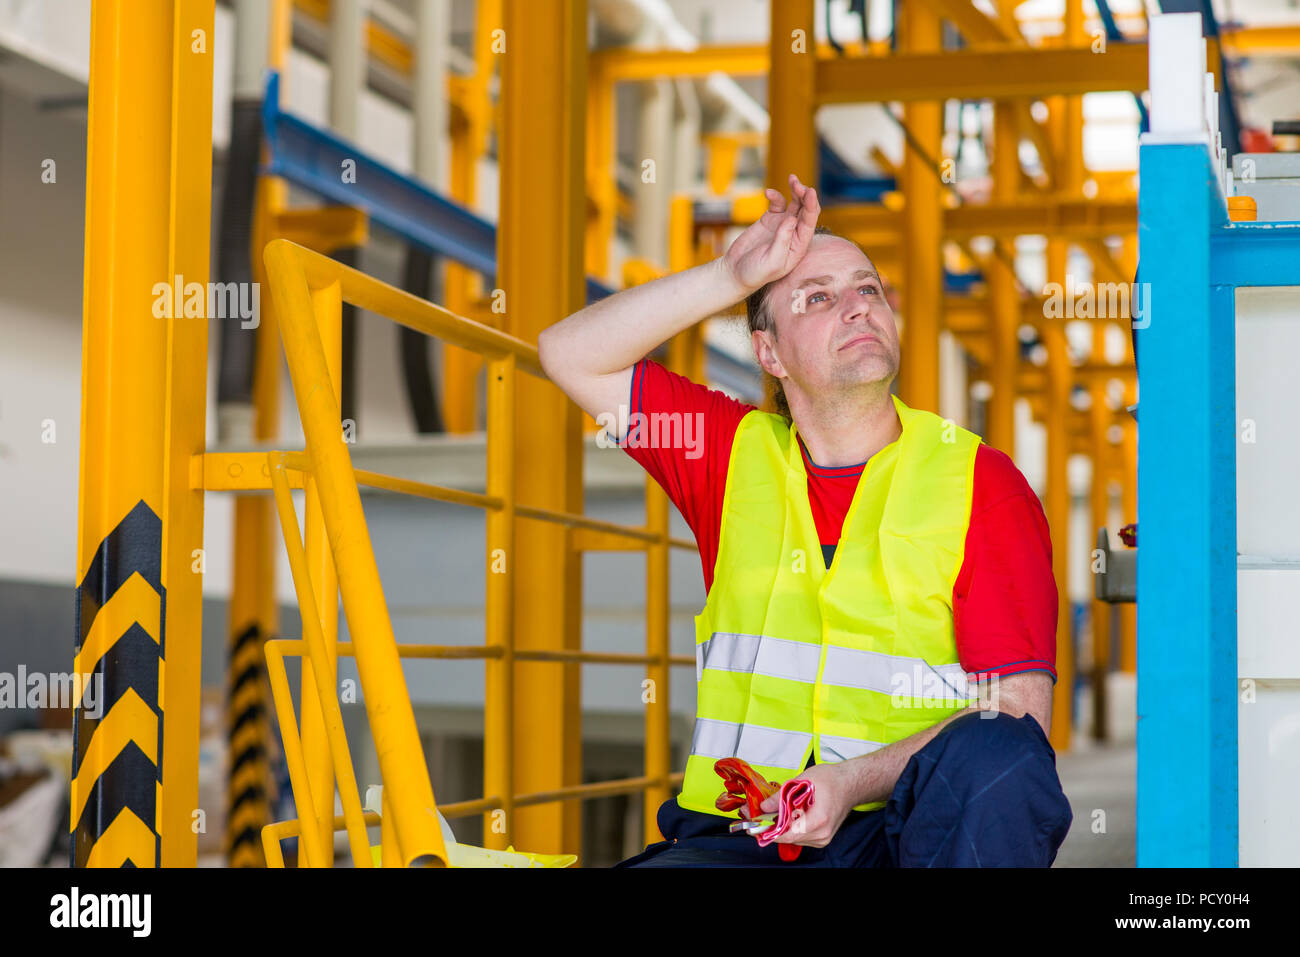 Tired factory worker wipe his sweat and resting after hard work Stock Photo